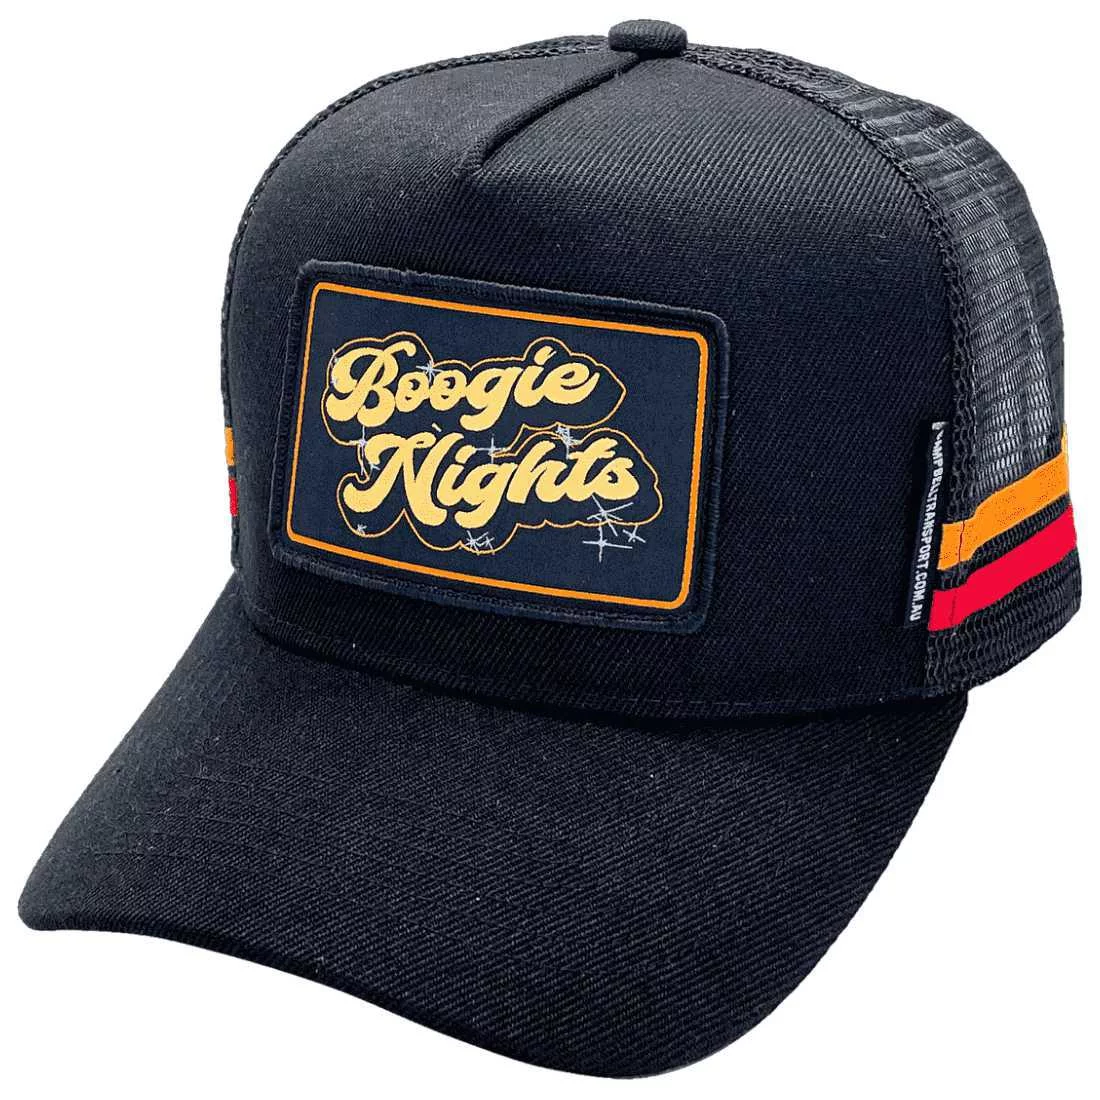 D.A. Campbell Transport Bathurst NSW HP Boogie Nights Original Basic Aussie Trucker Hats with double side bands Acrylic Black Orange Red with sew-on woven badge